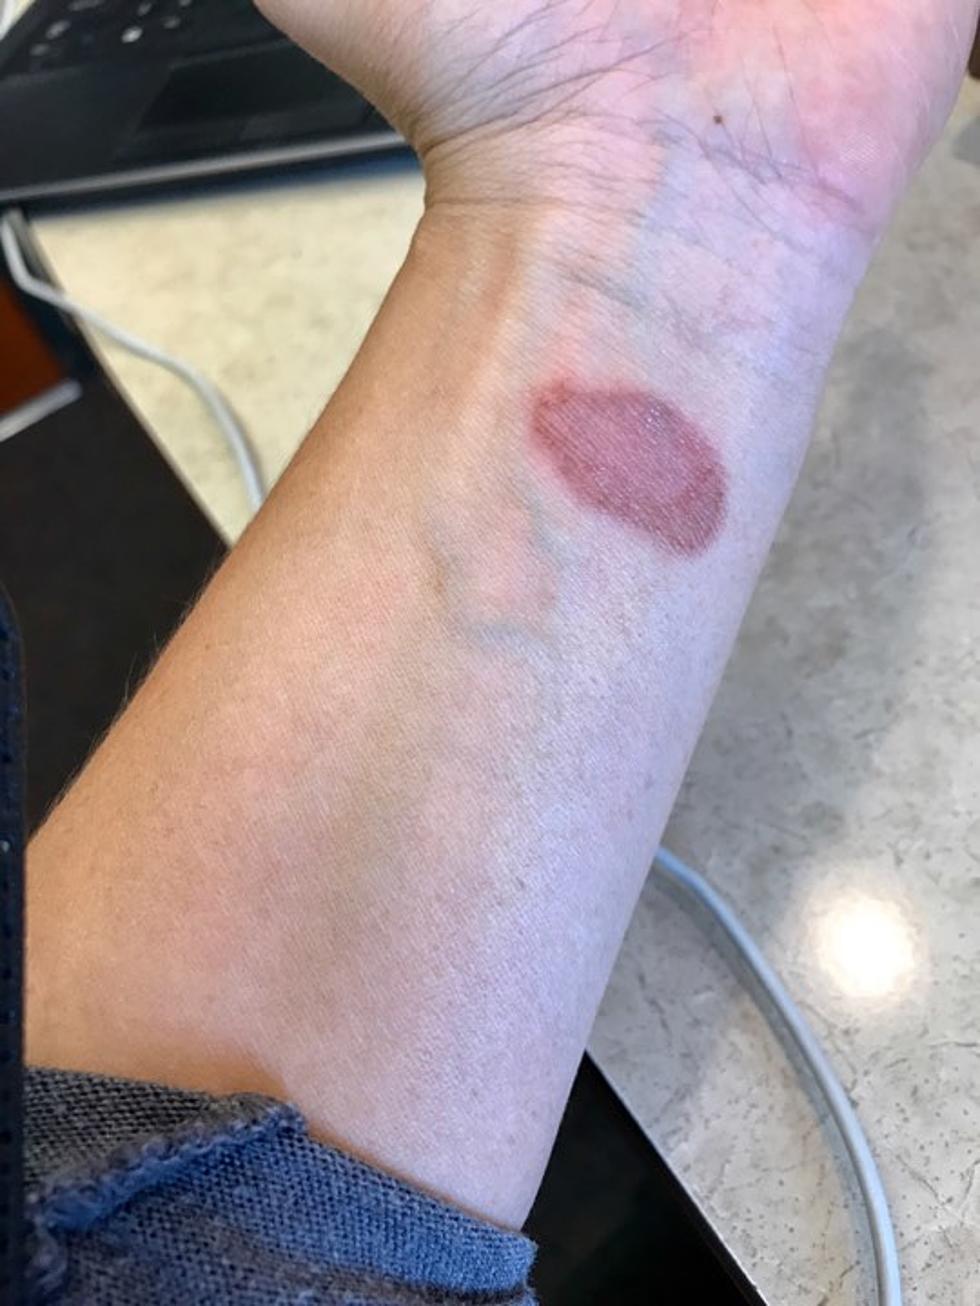 Beauty Pains, Burning Yourself With a Curling Iron Stories